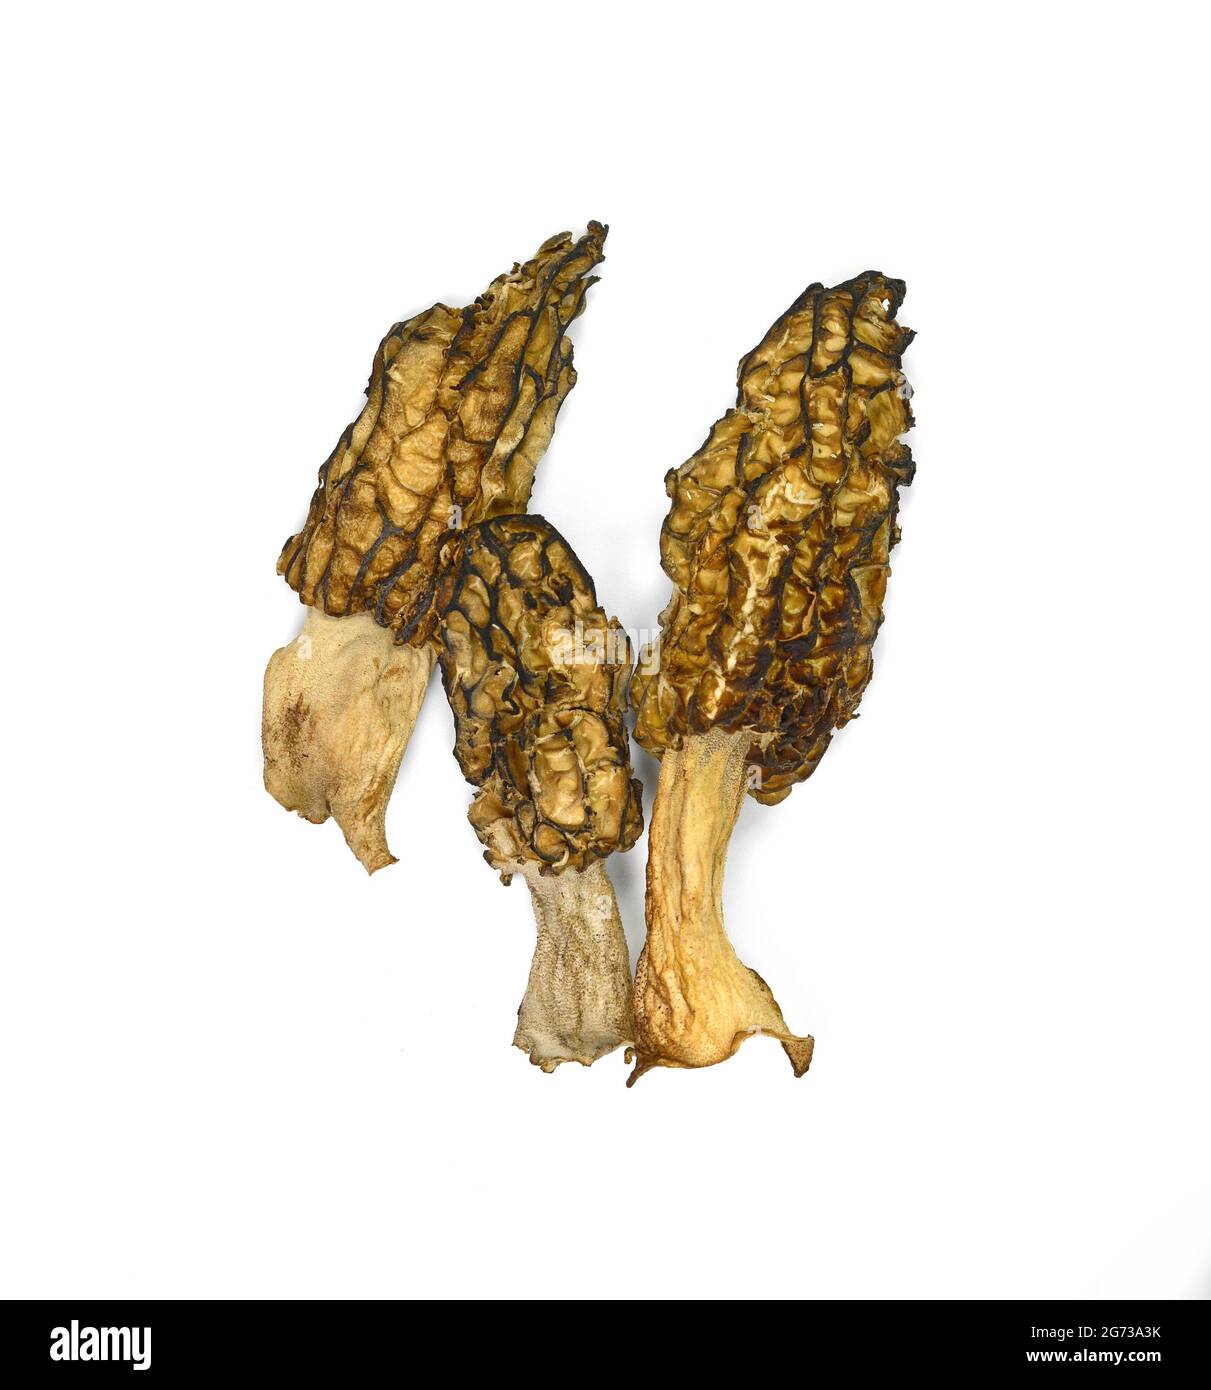 Dried Morel mushrooms isolated on white background. Morchella conica or Black Morel mushroom. Dried mushrooms Stock Photo